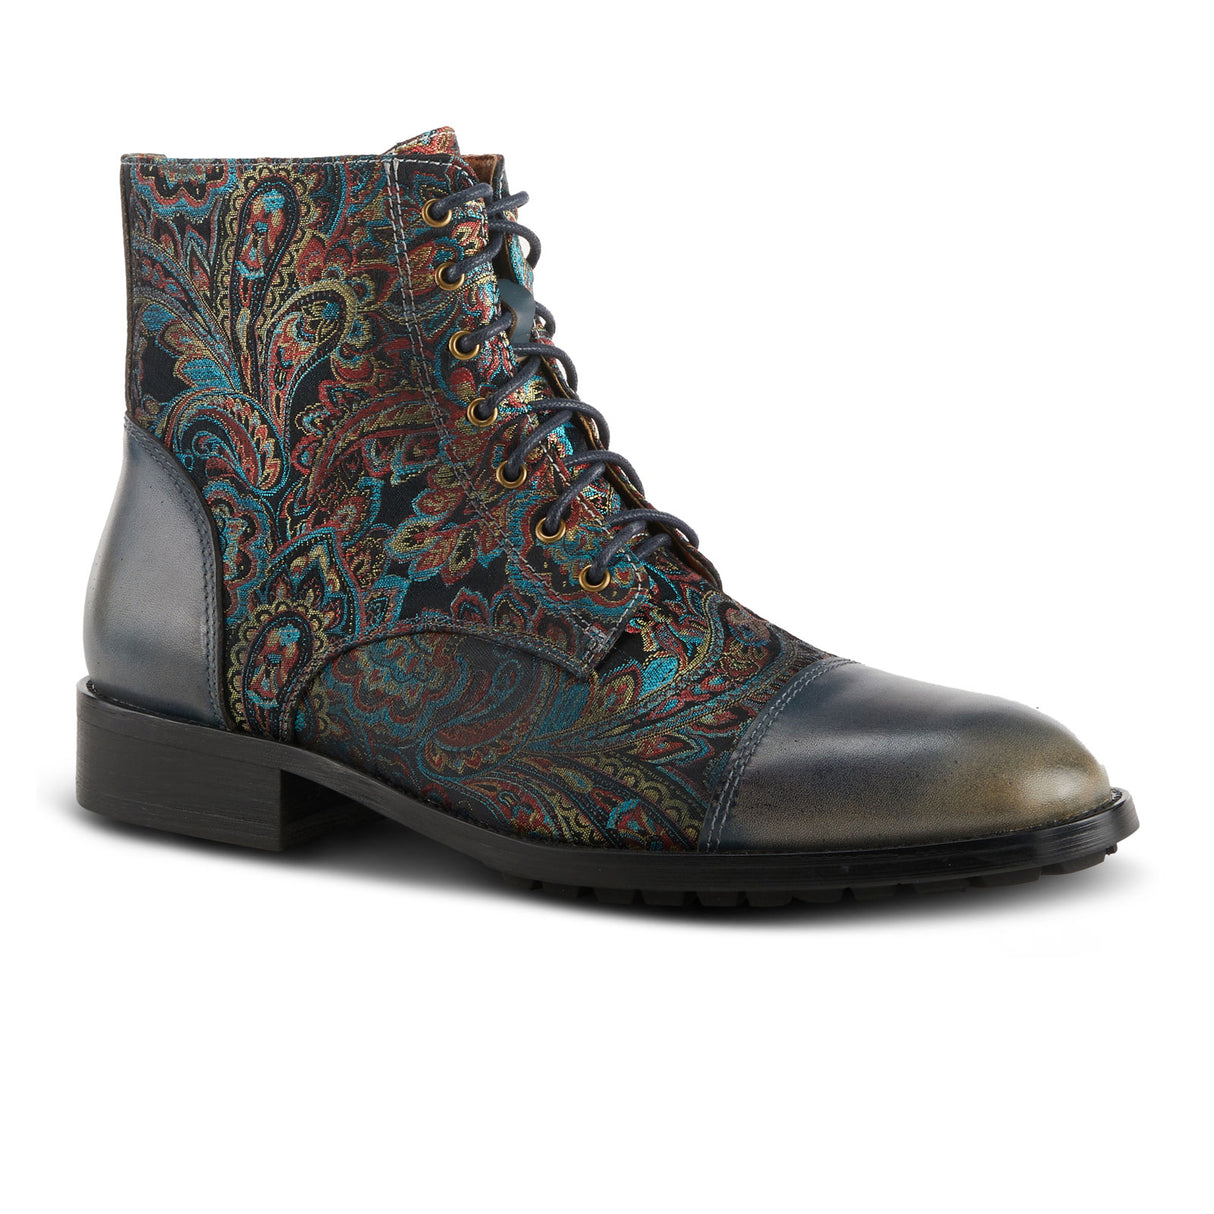 L'Artiste Berger Ankle Boot (Men) - Blue Multi Boots - Fashion - Ankle Boot - The Heel Shoe Fitters